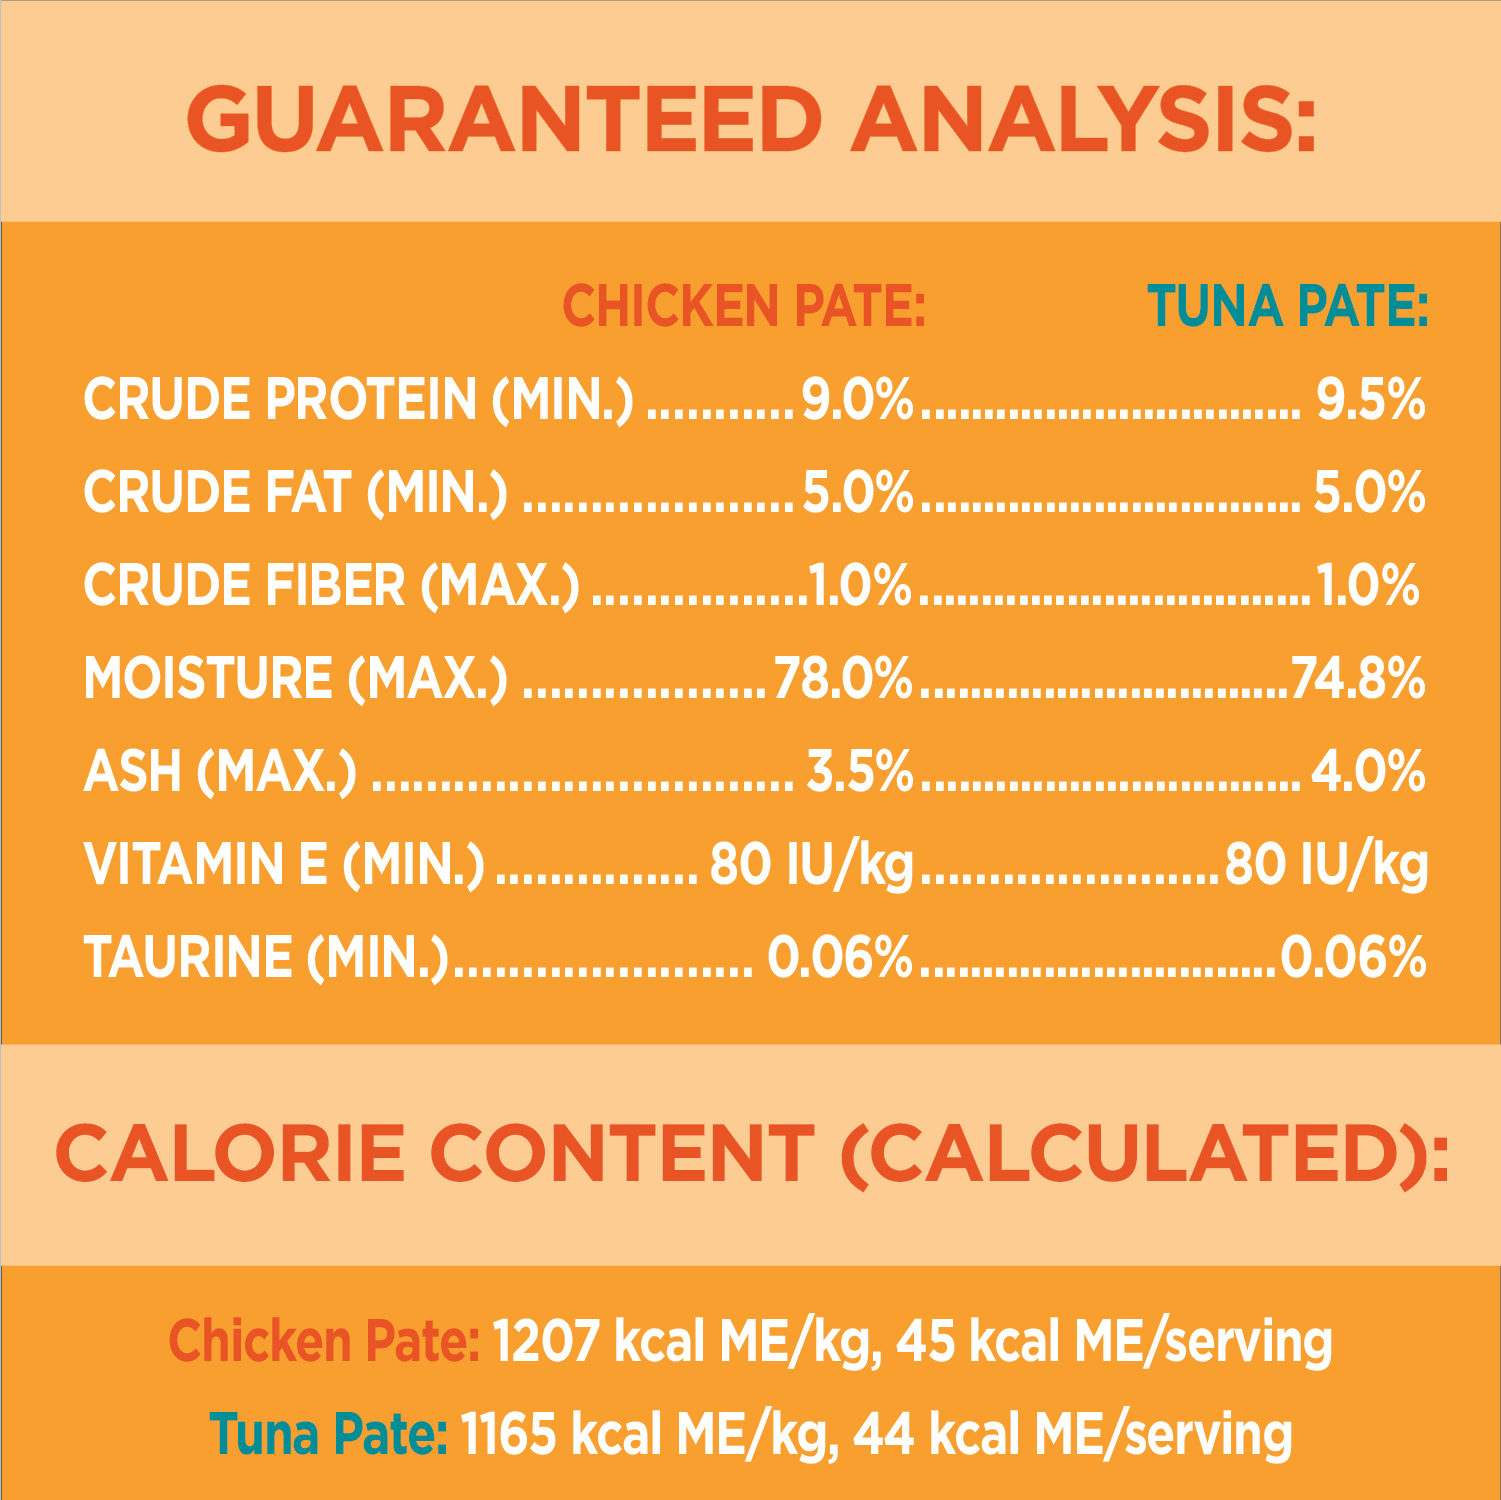 IAMS™ PERFECT PORTIONS™ Healthy Adult Wet Cat Food Chicken & Tuna Paté, 24x75g image 1